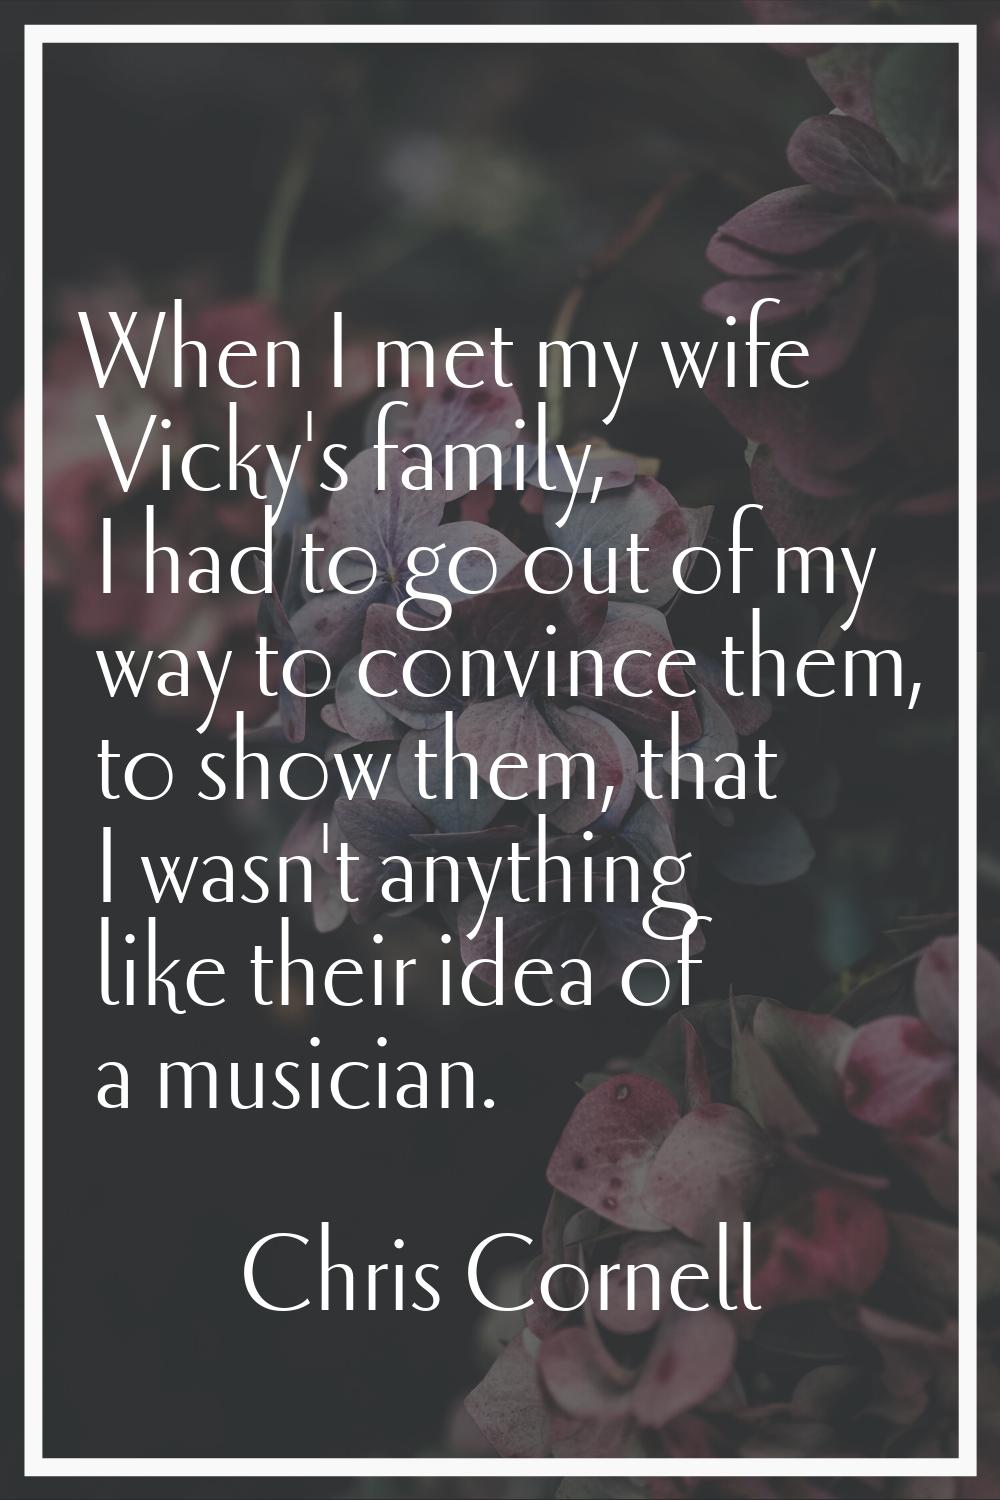 When I met my wife Vicky's family, I had to go out of my way to convince them, to show them, that I